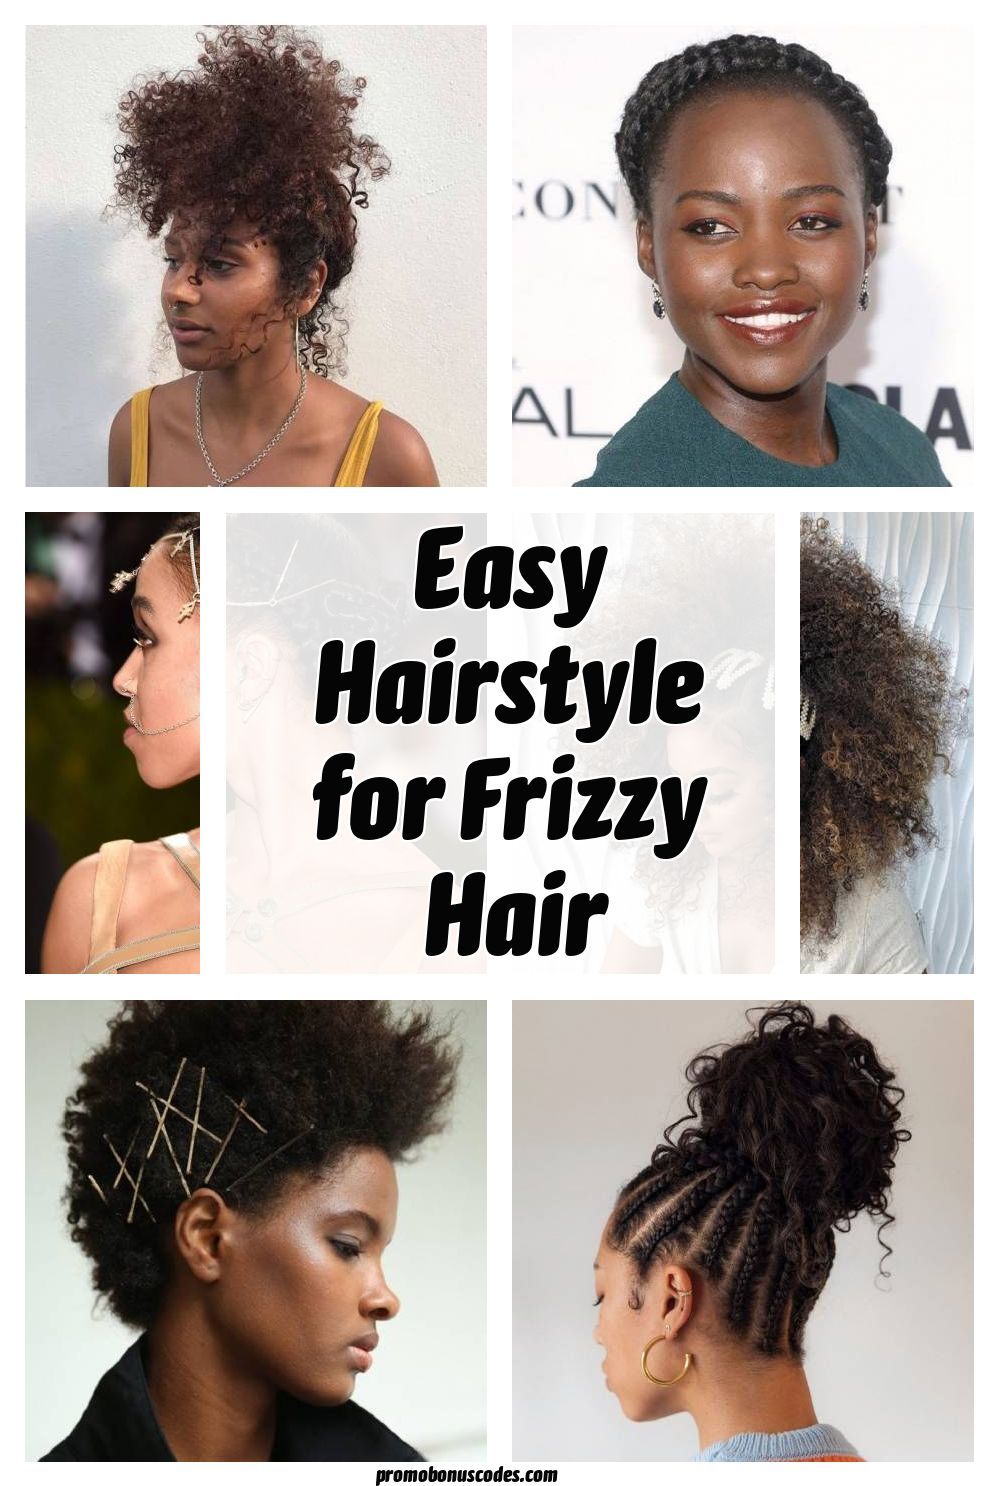 Easy Hairstyle for Frizzy Hair